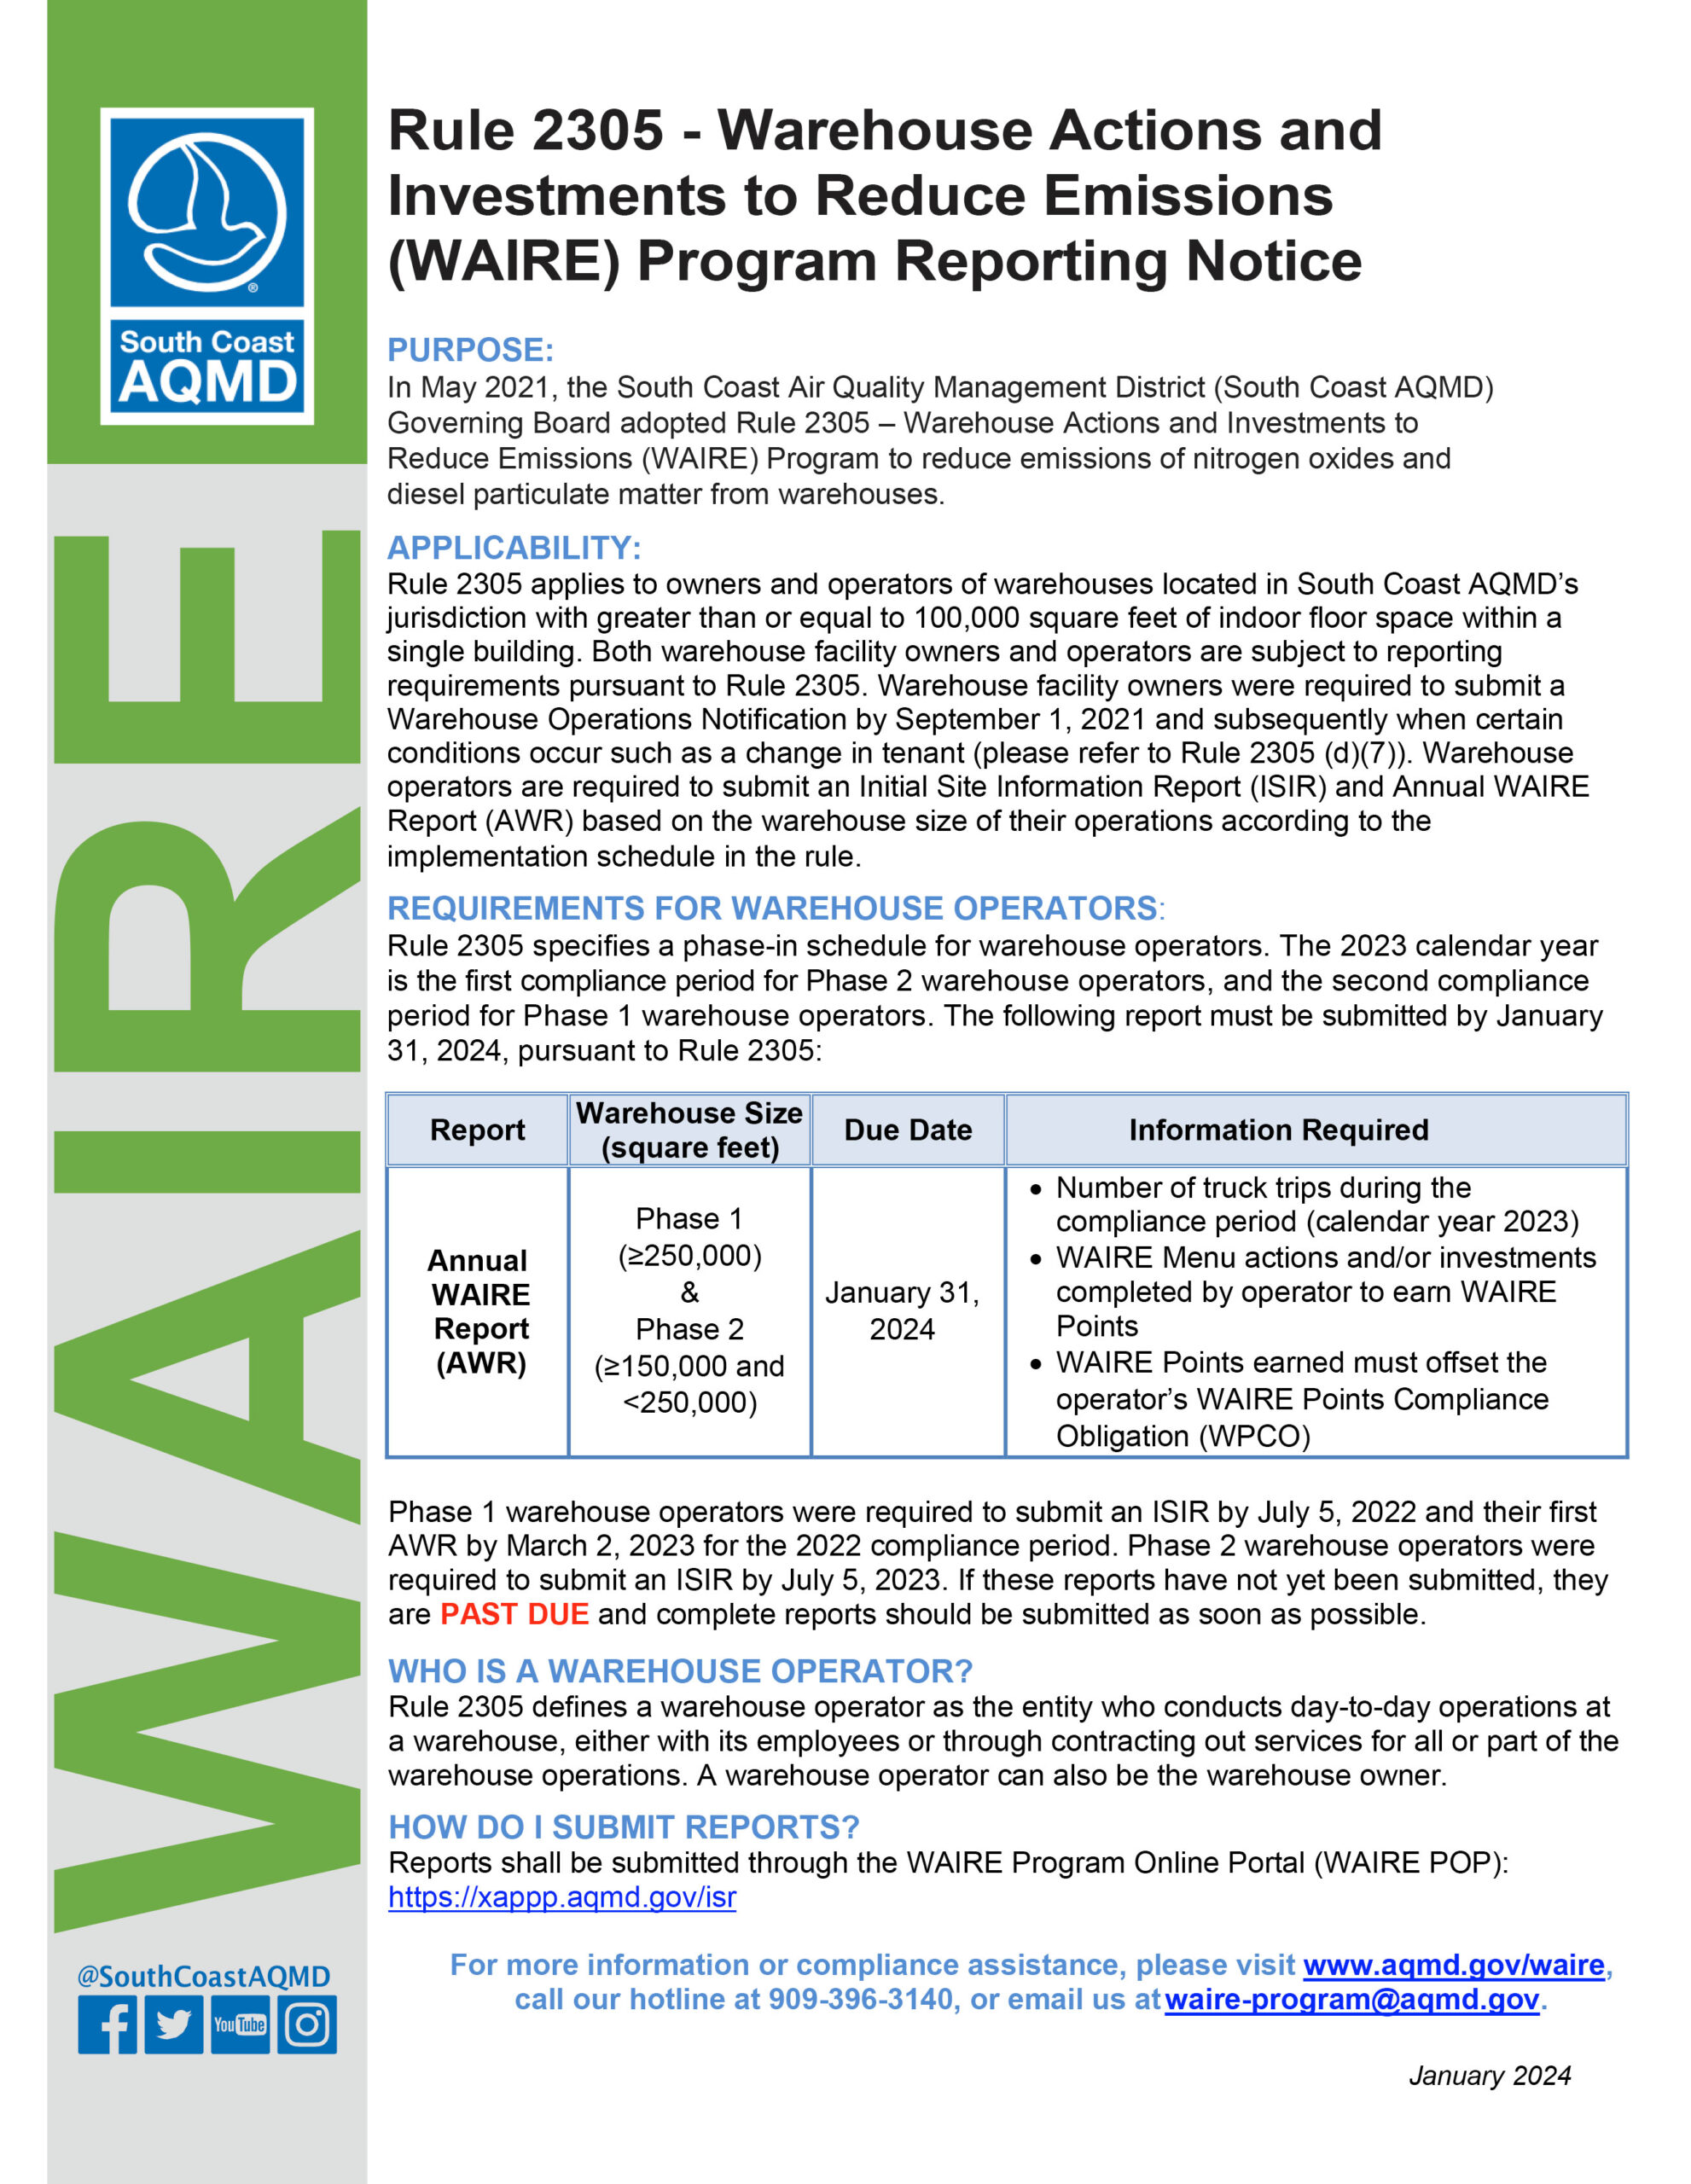 WAIRE Reporting Notice from AQMD